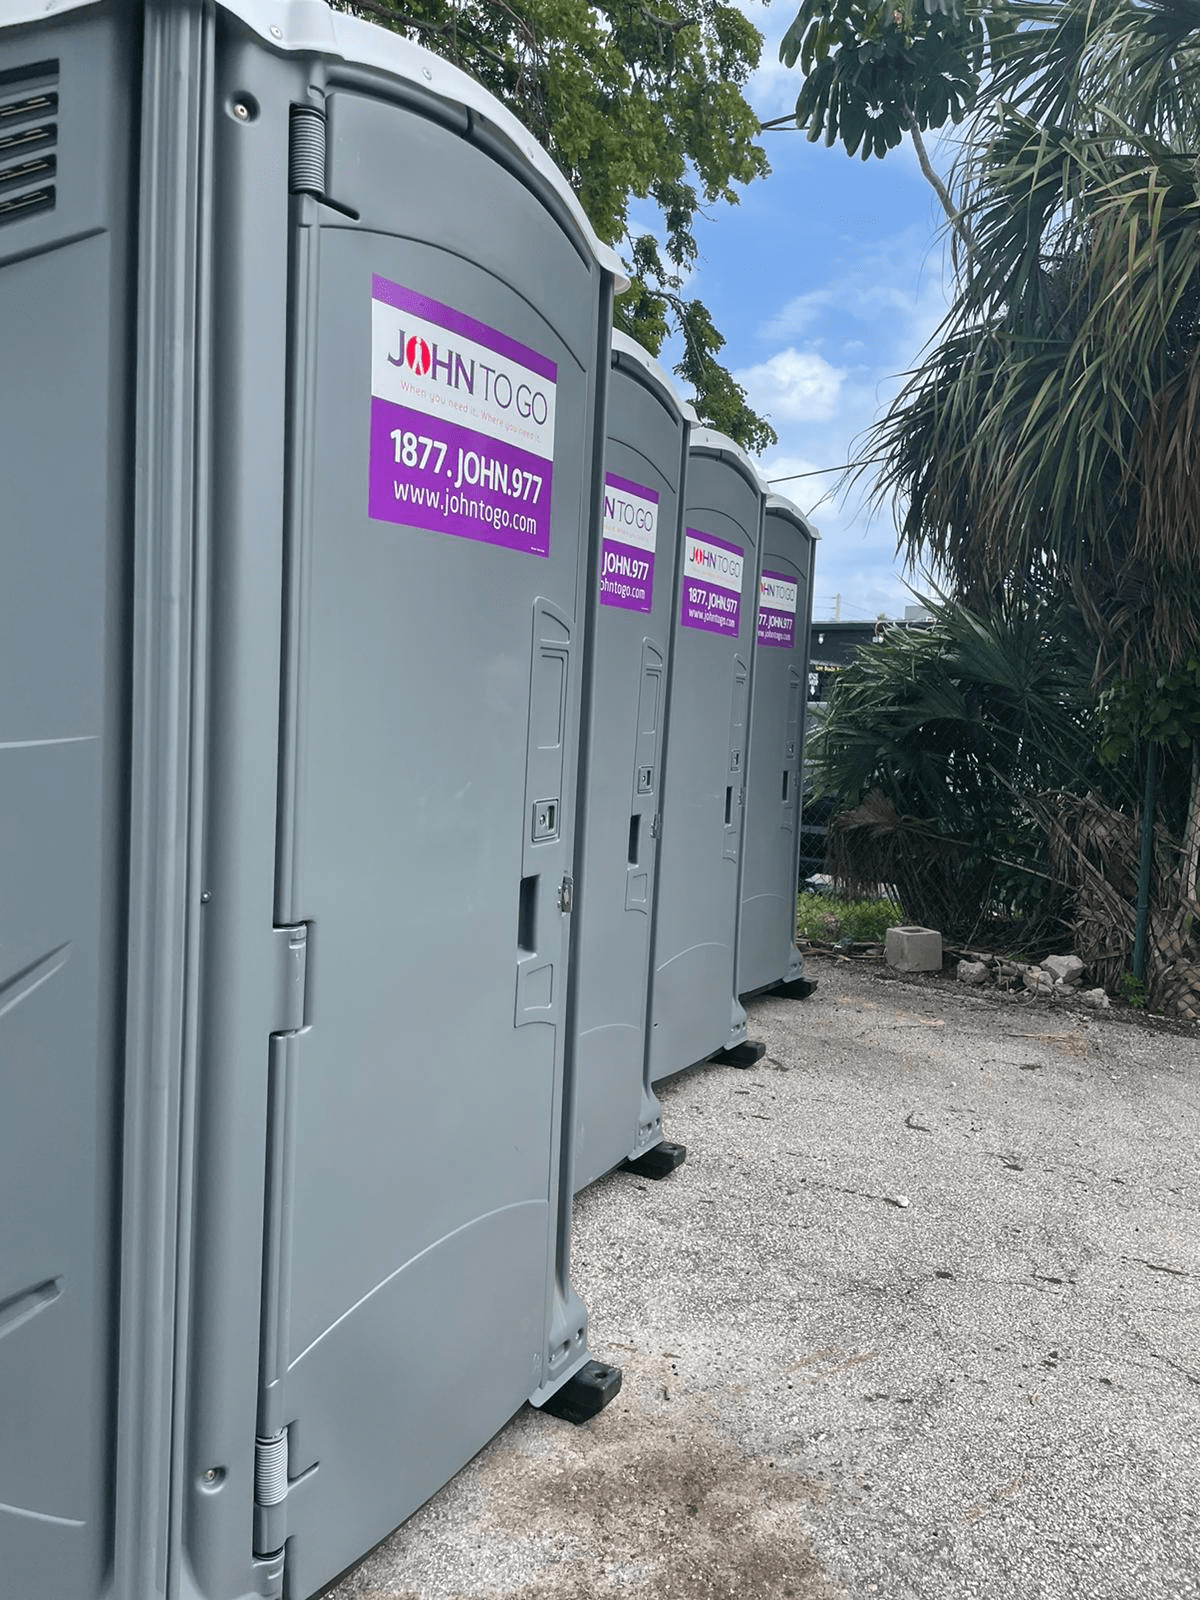 Premium porta potty rental near Rocky Point for outdoor events